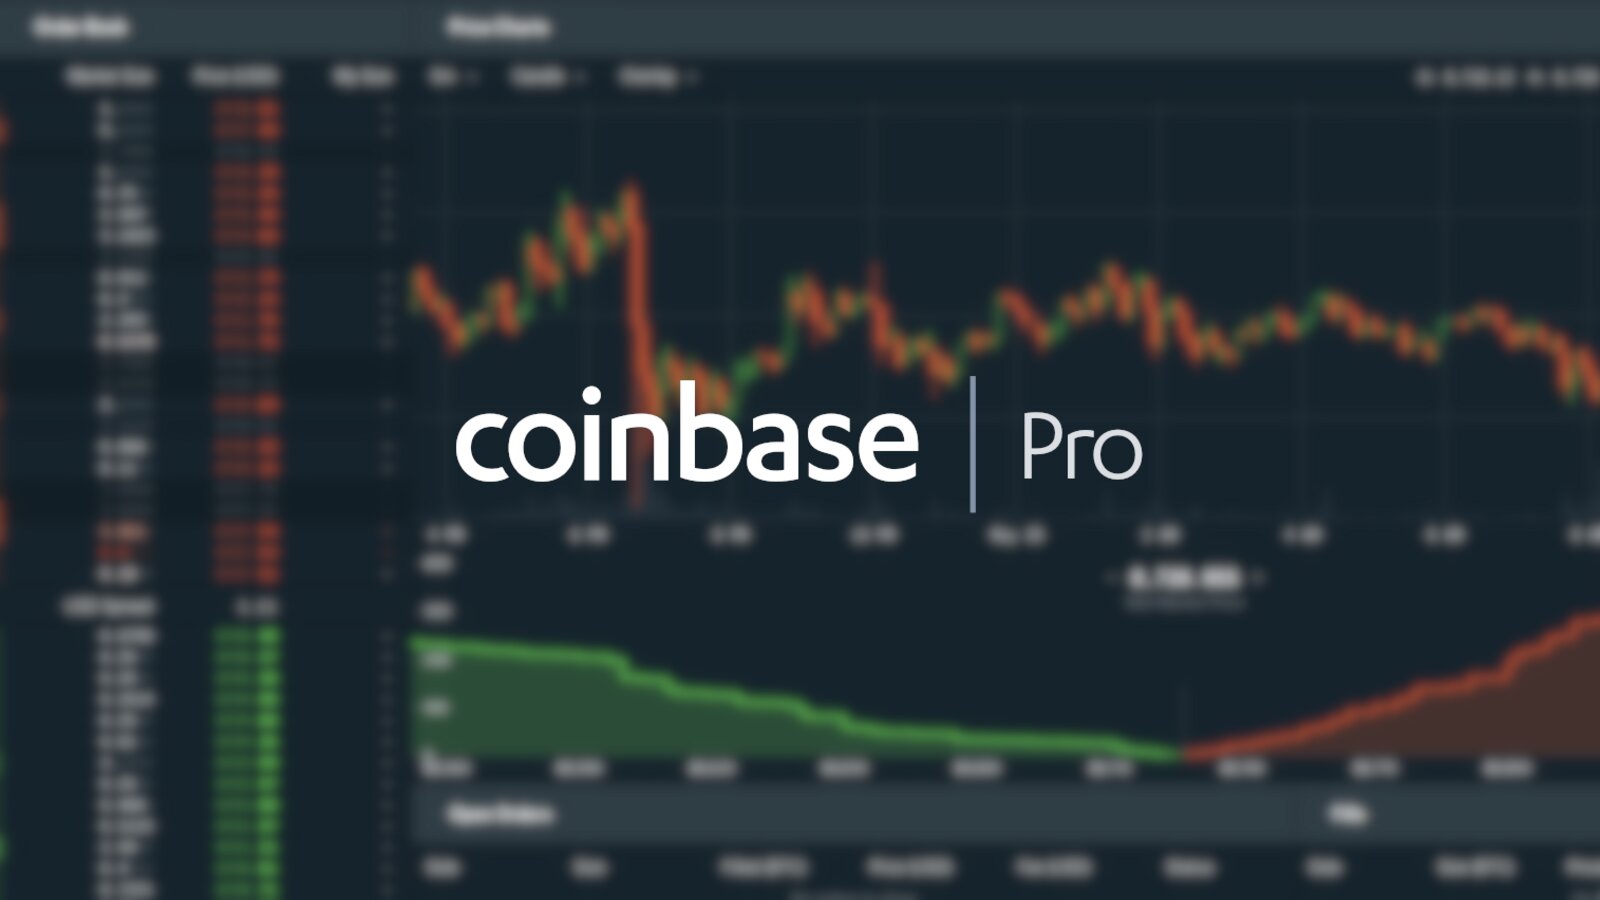 Coinbase Advanced offers perpetual futures to non-US customers - Blockworks